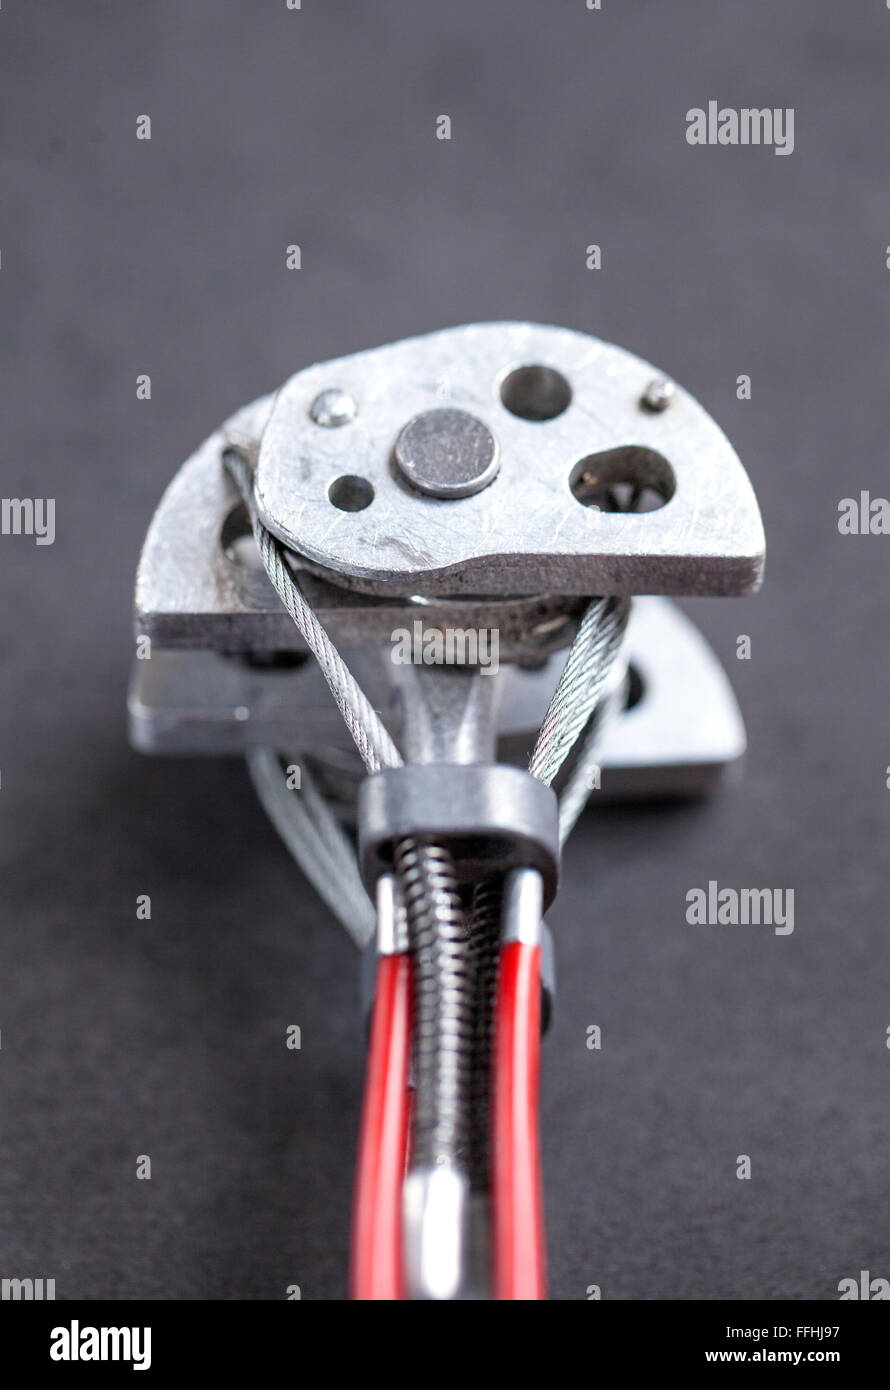 Close up view of a climbing friend gear, also known as spring-loaded camming device (SLCD), on dark background. Stock Photo